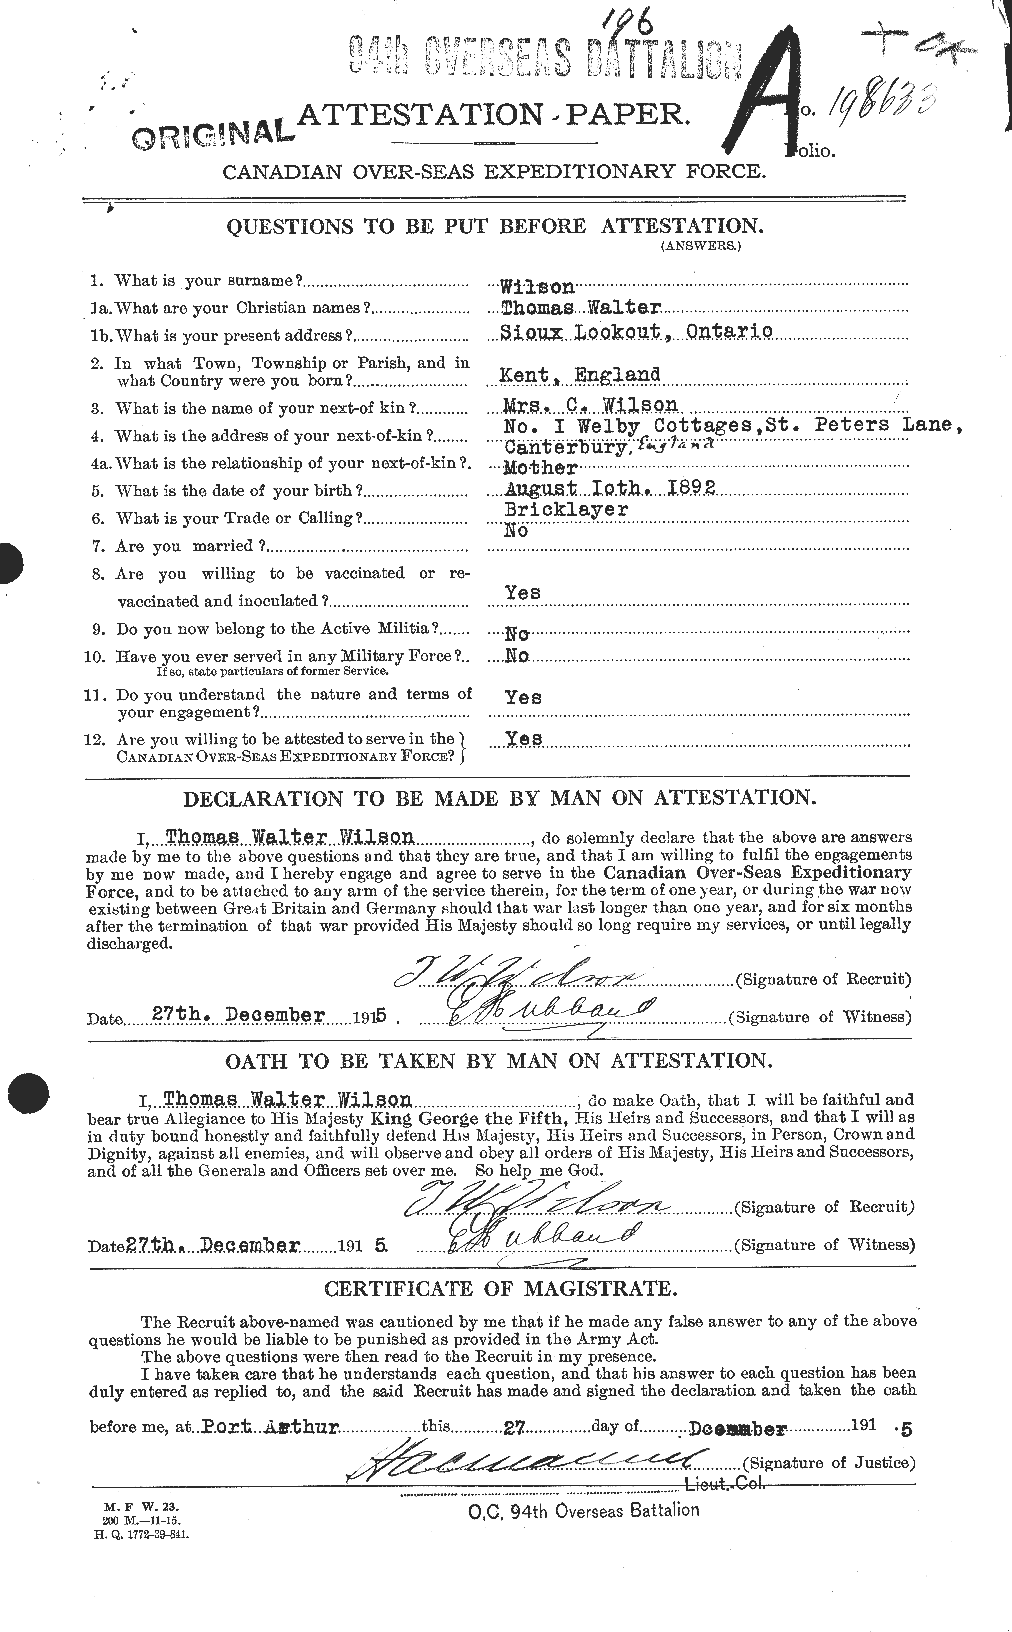 Personnel Records of the First World War - CEF 681691a